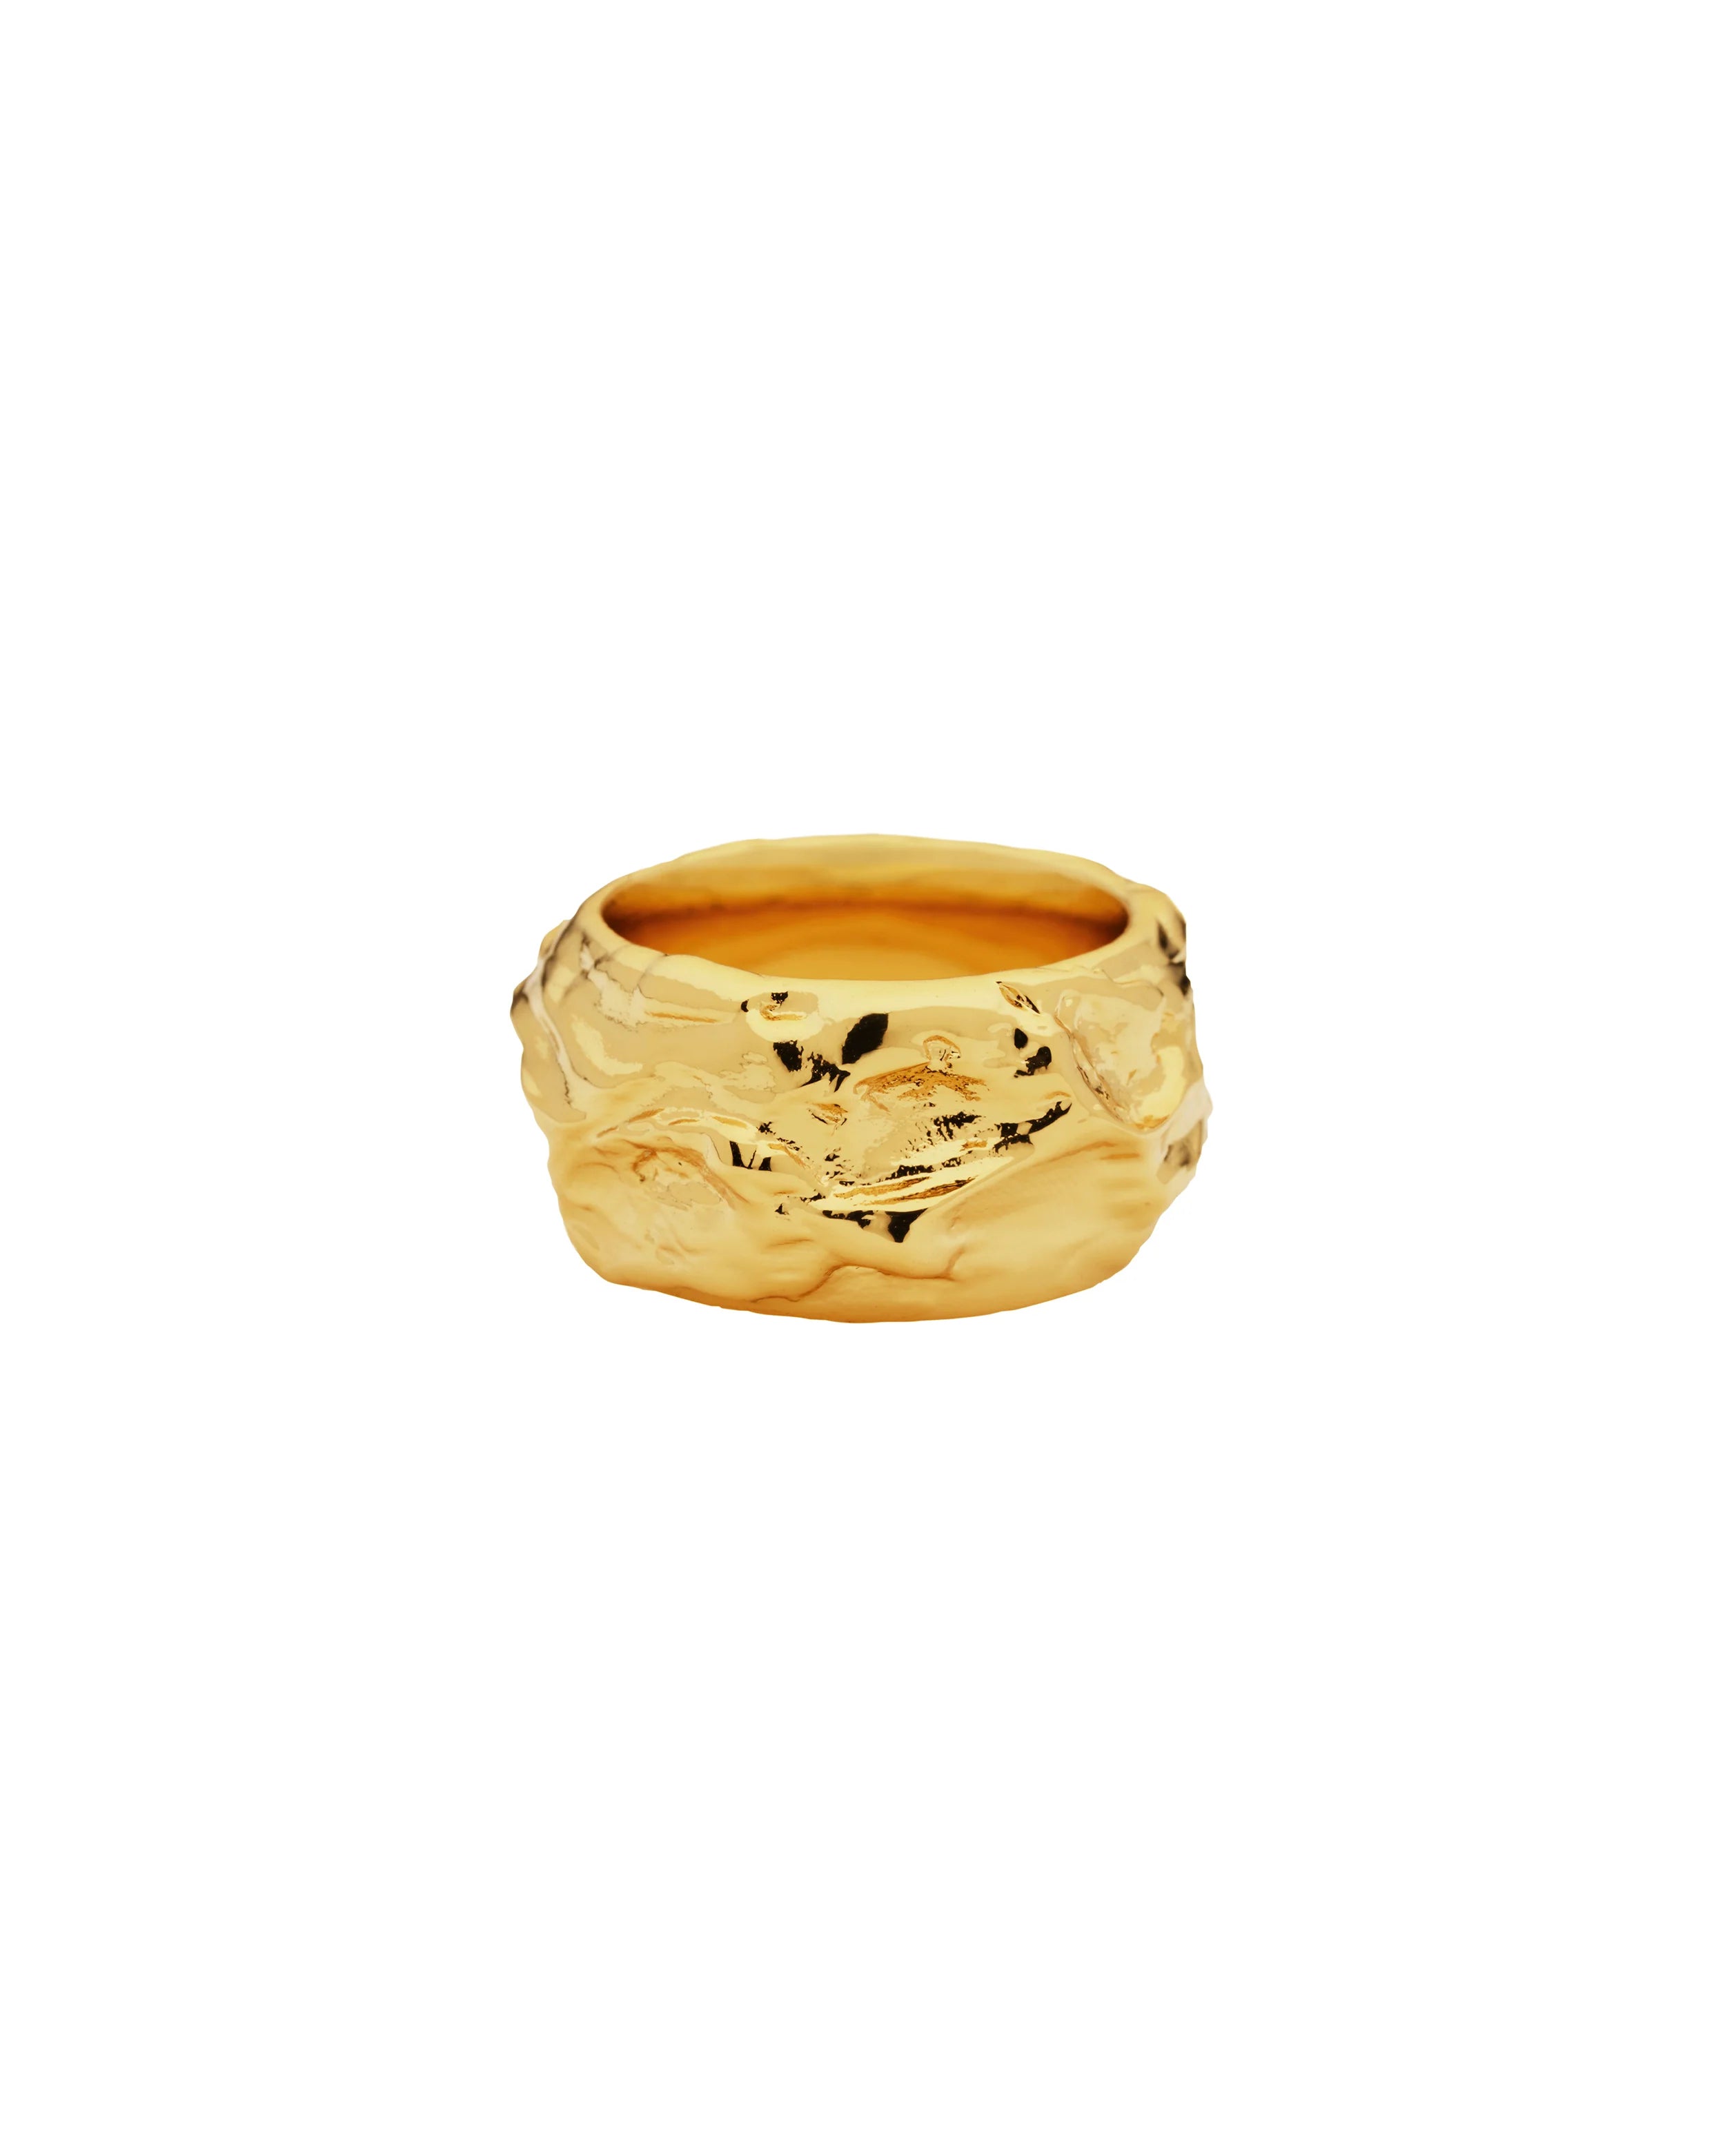 Amber Sceats Florie Ring